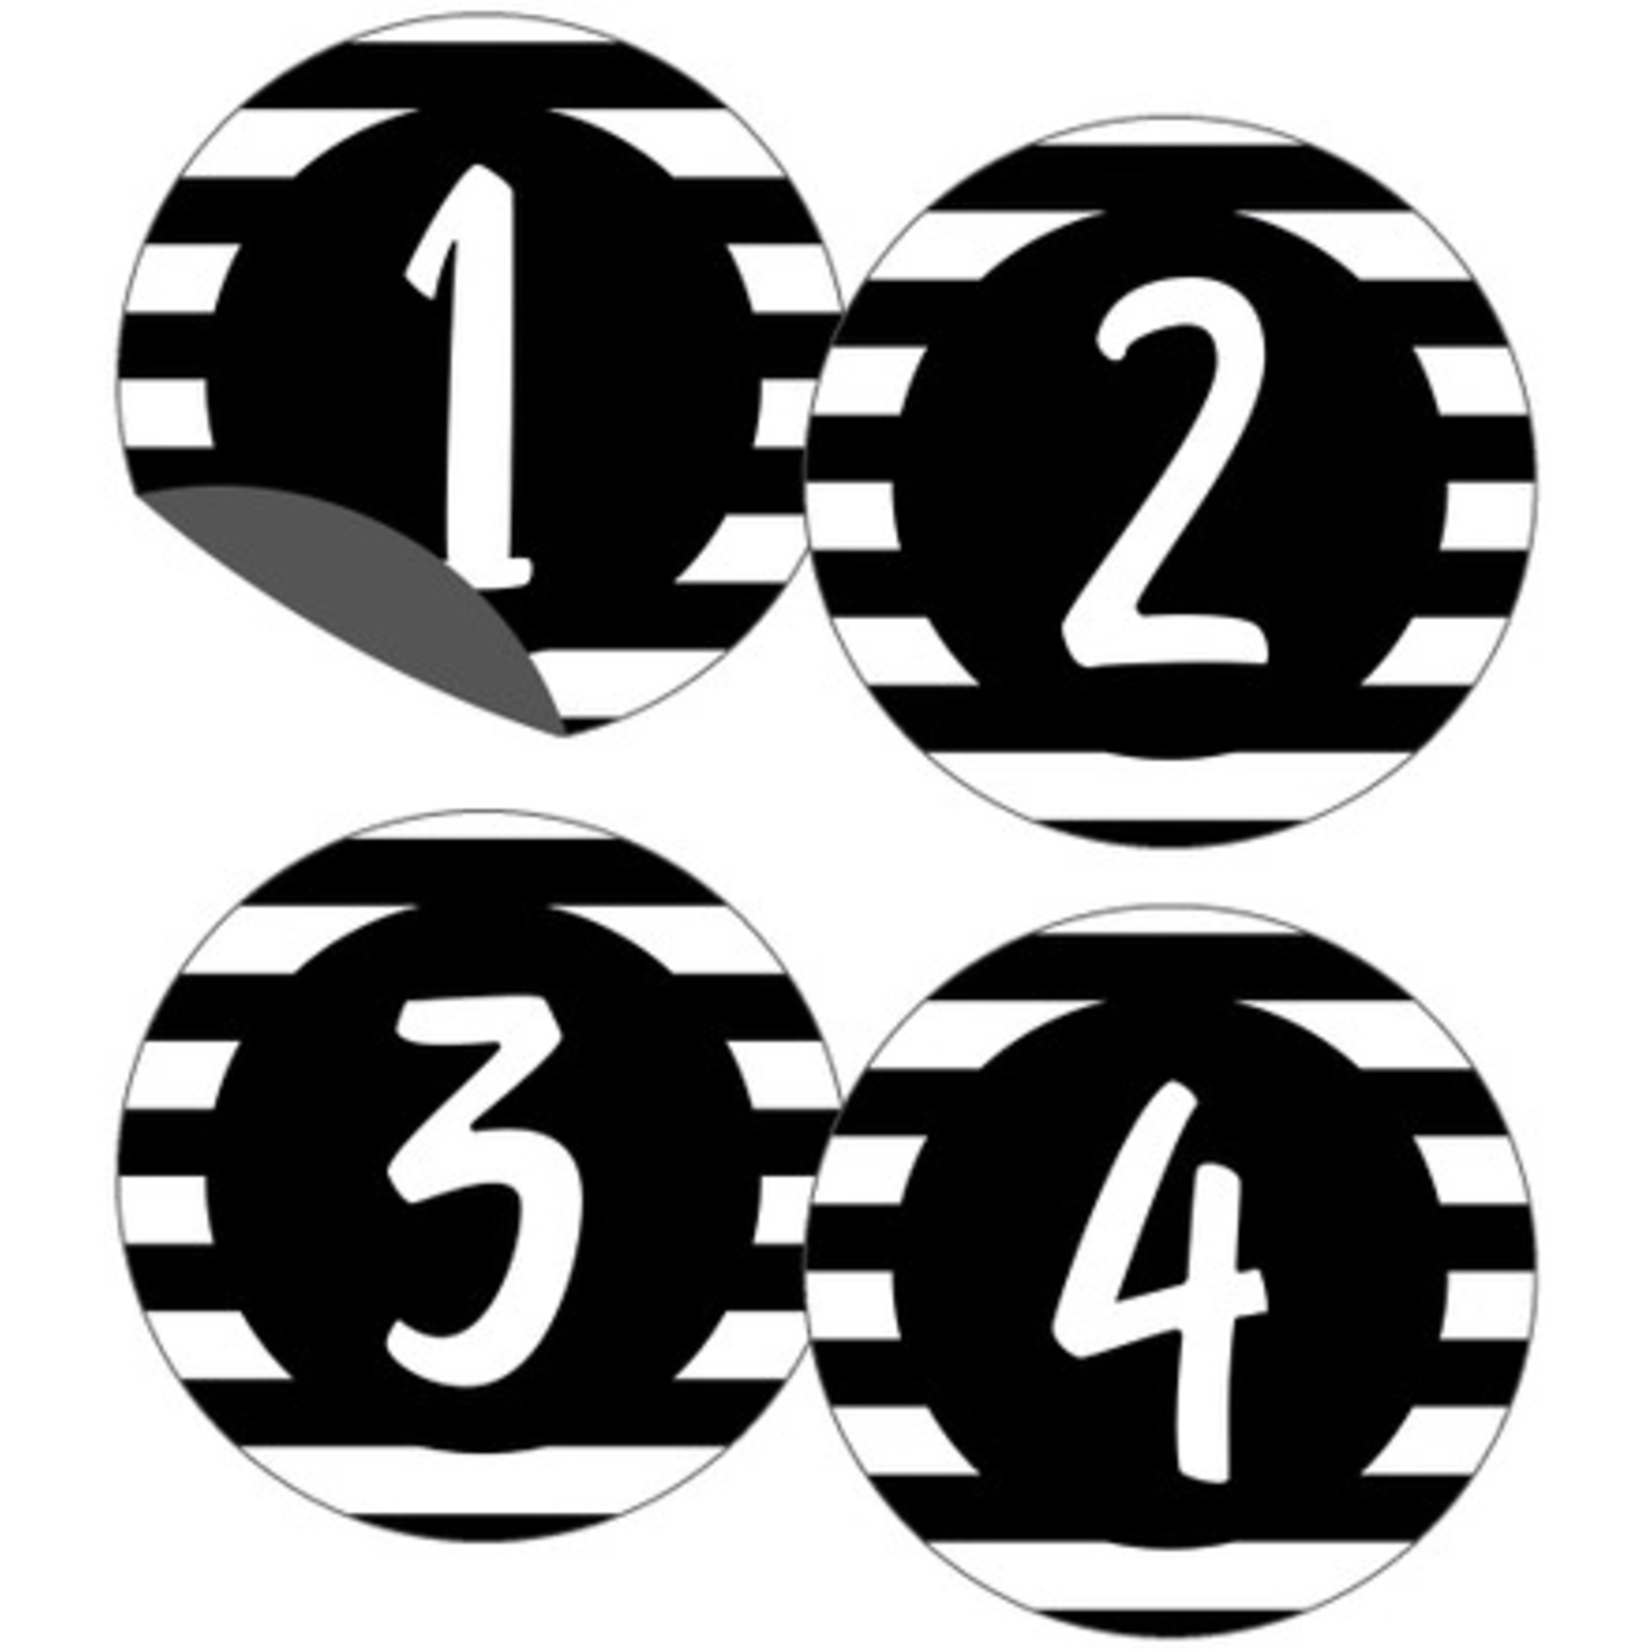 CARSON DELLOSA PUBLISHING CO Simply Stylish Numbers Magnetic Cut-Outs